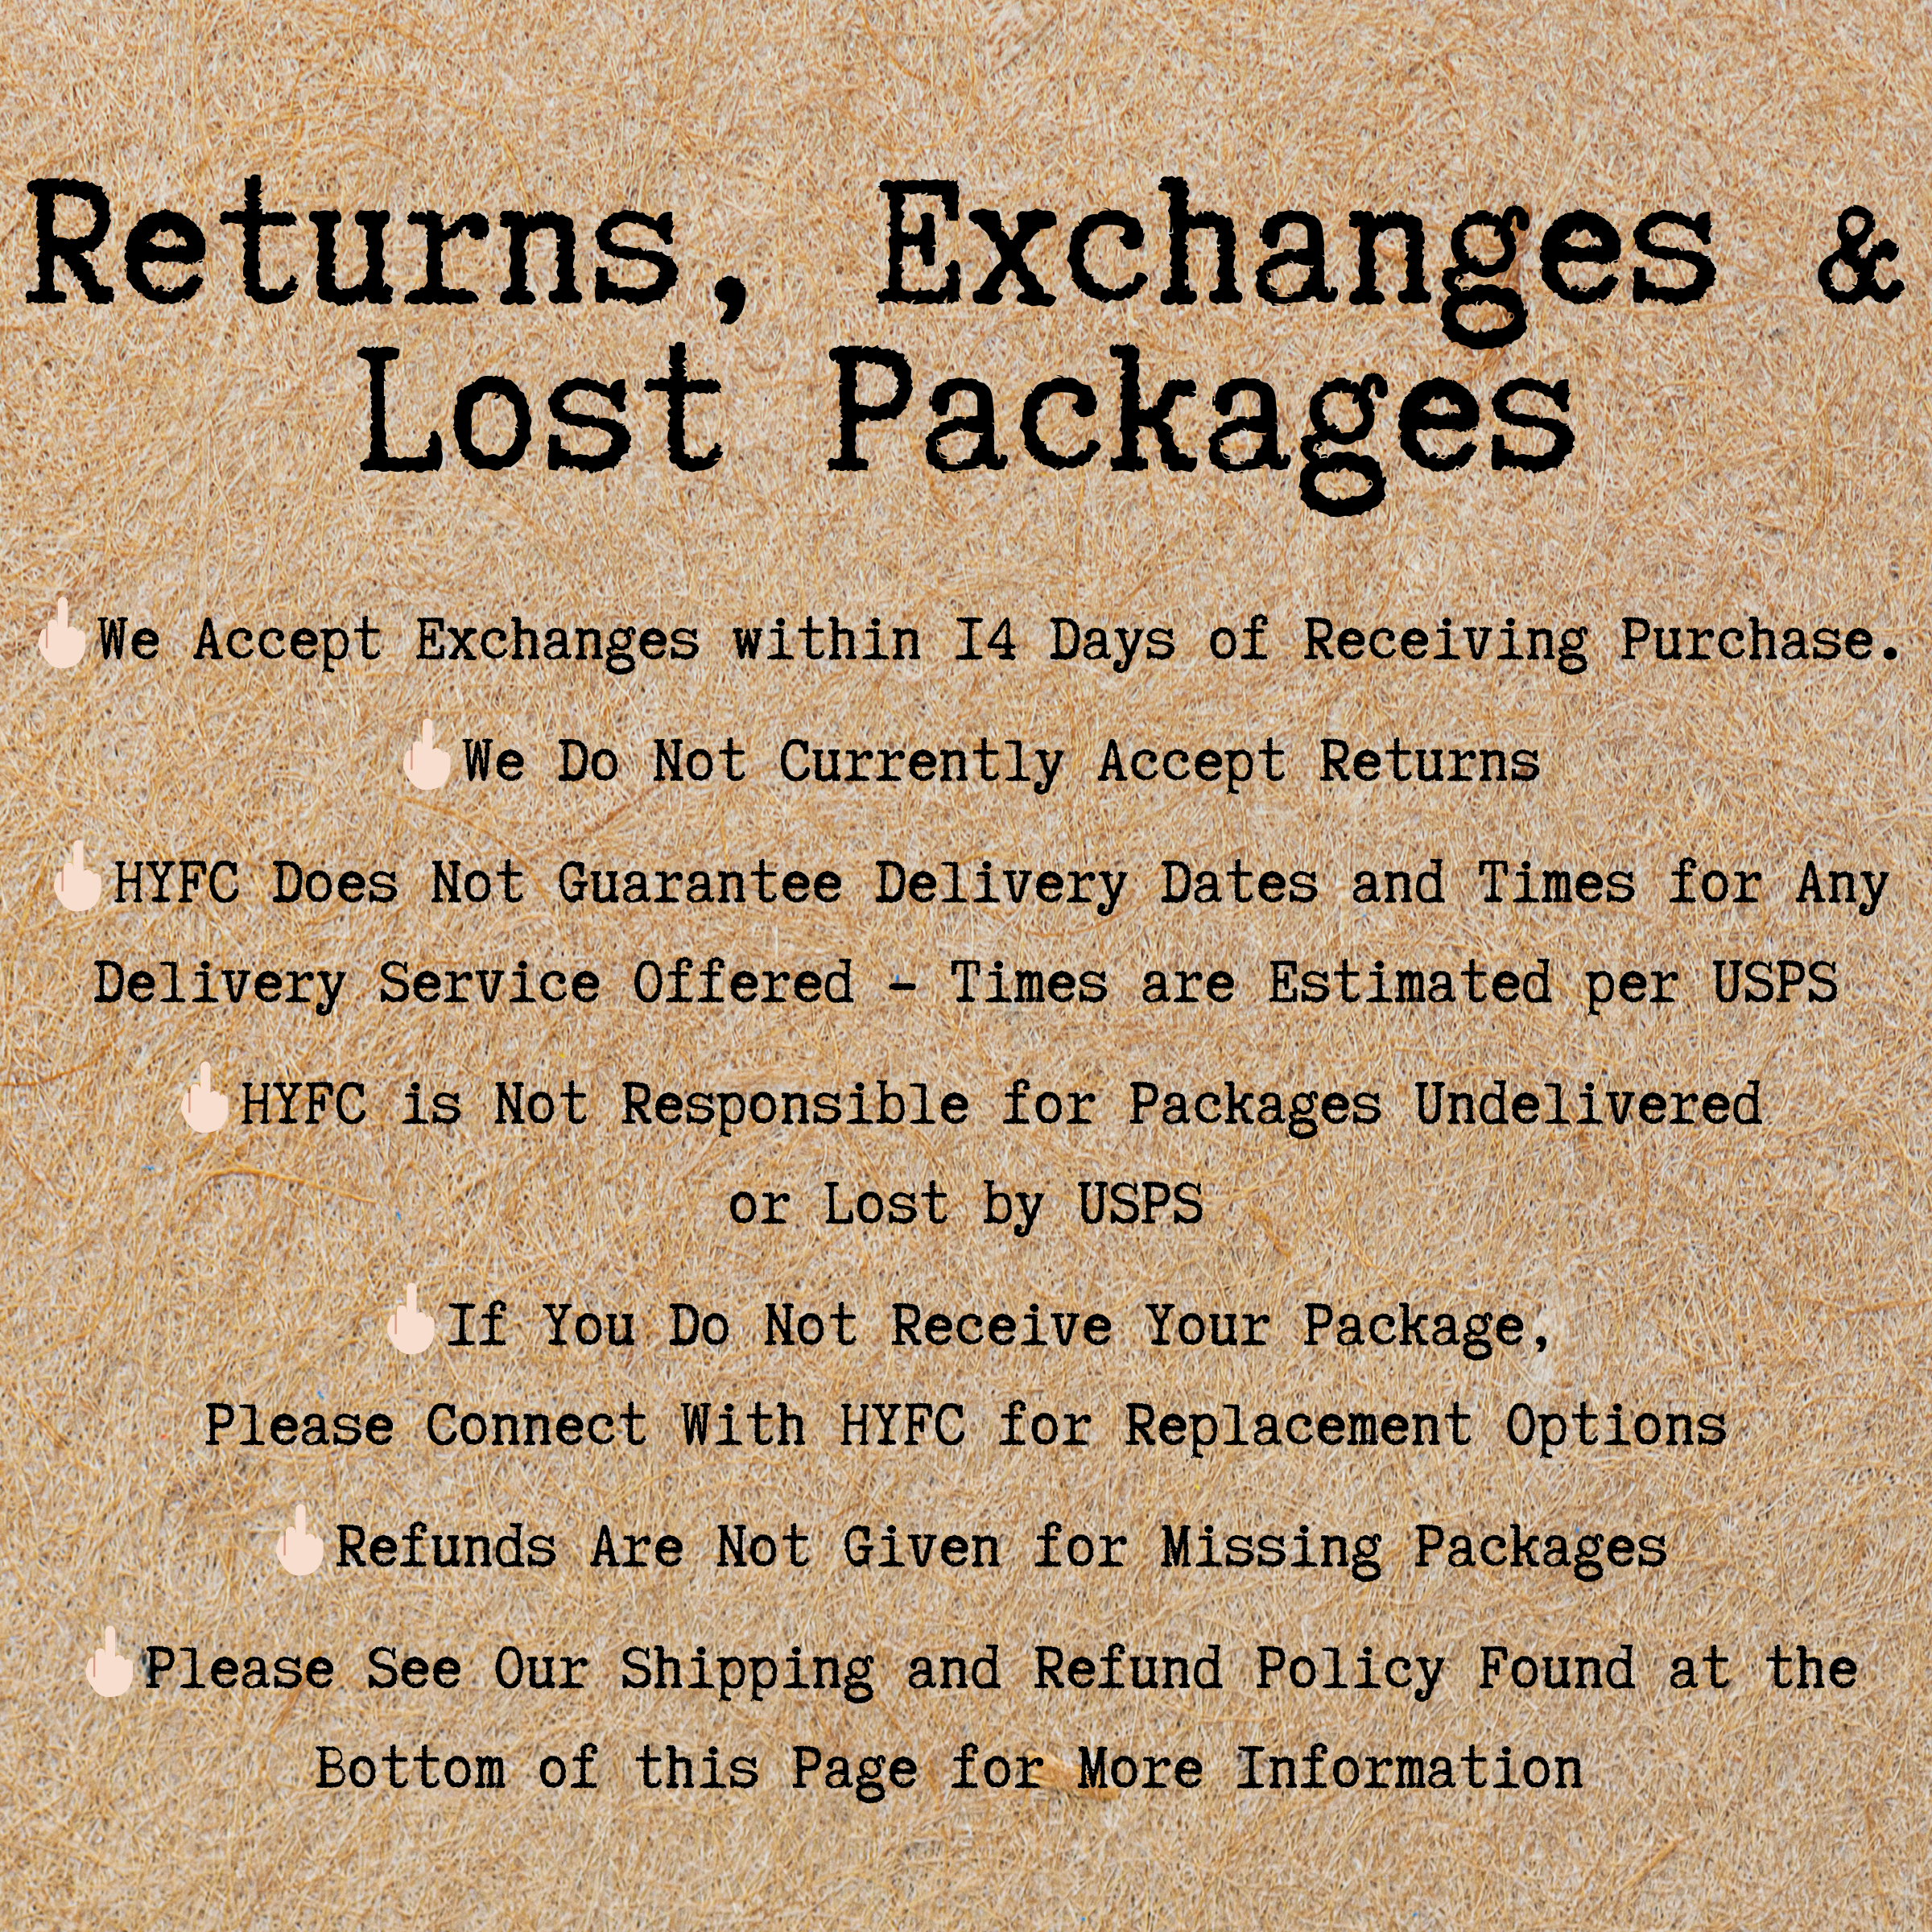 Find Return, Exchange and Lost Package info on this image